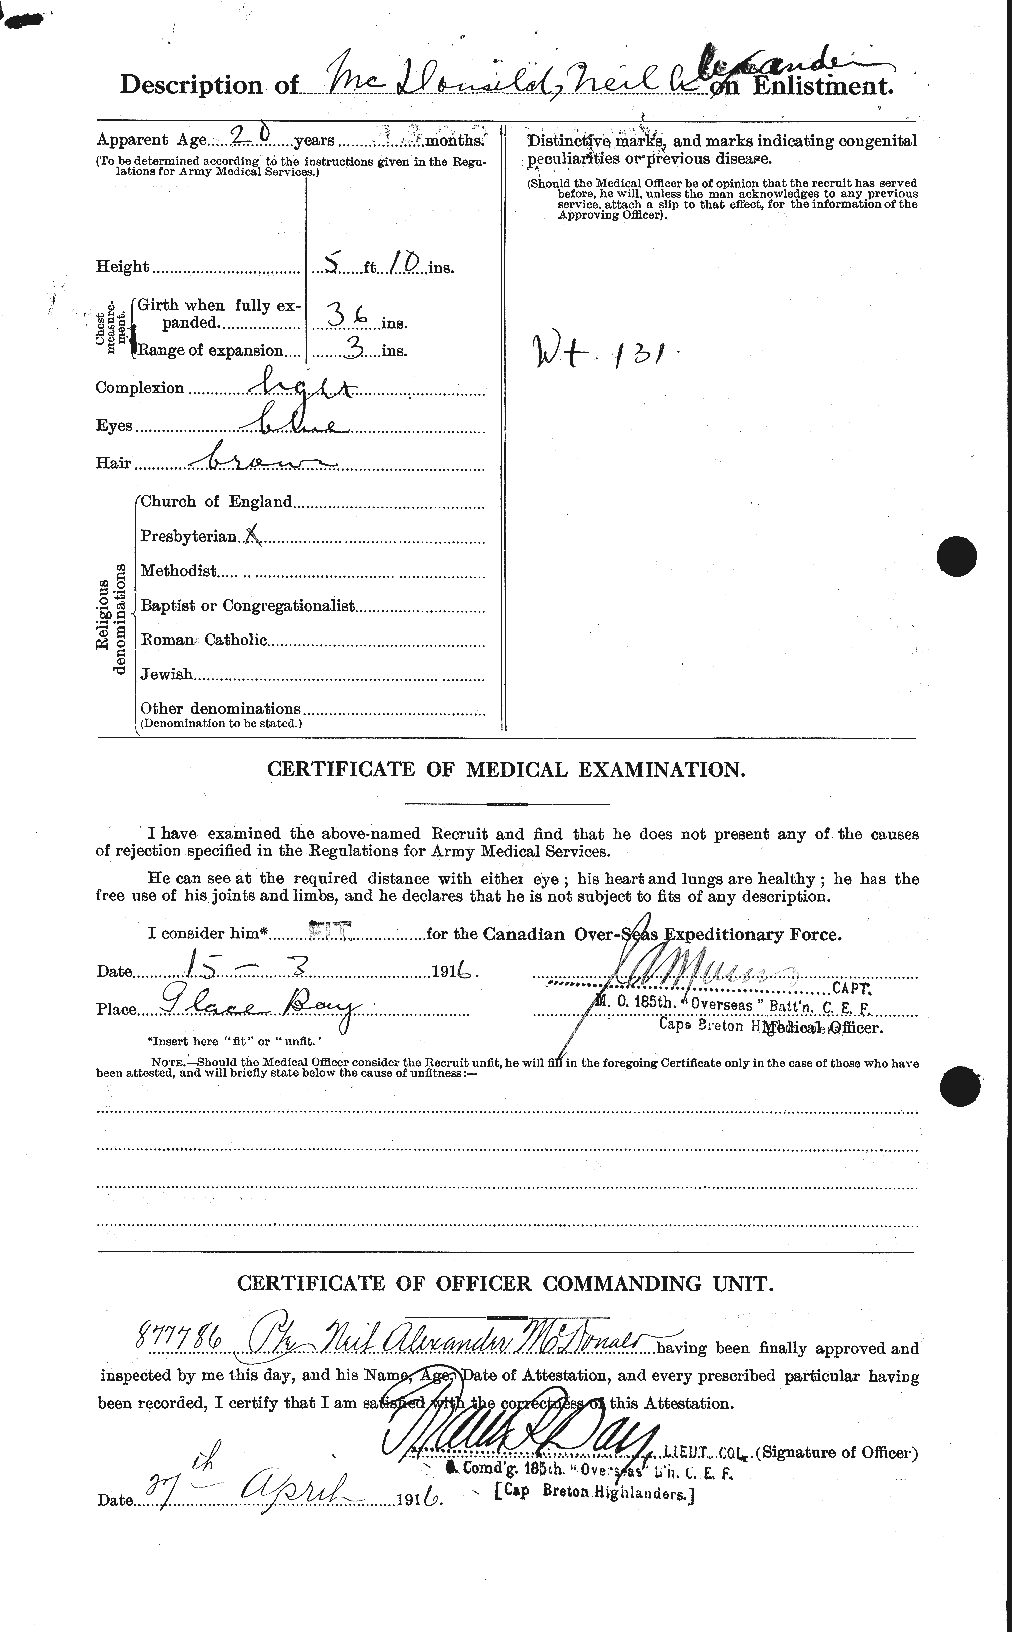 Personnel Records of the First World War - CEF 524521b